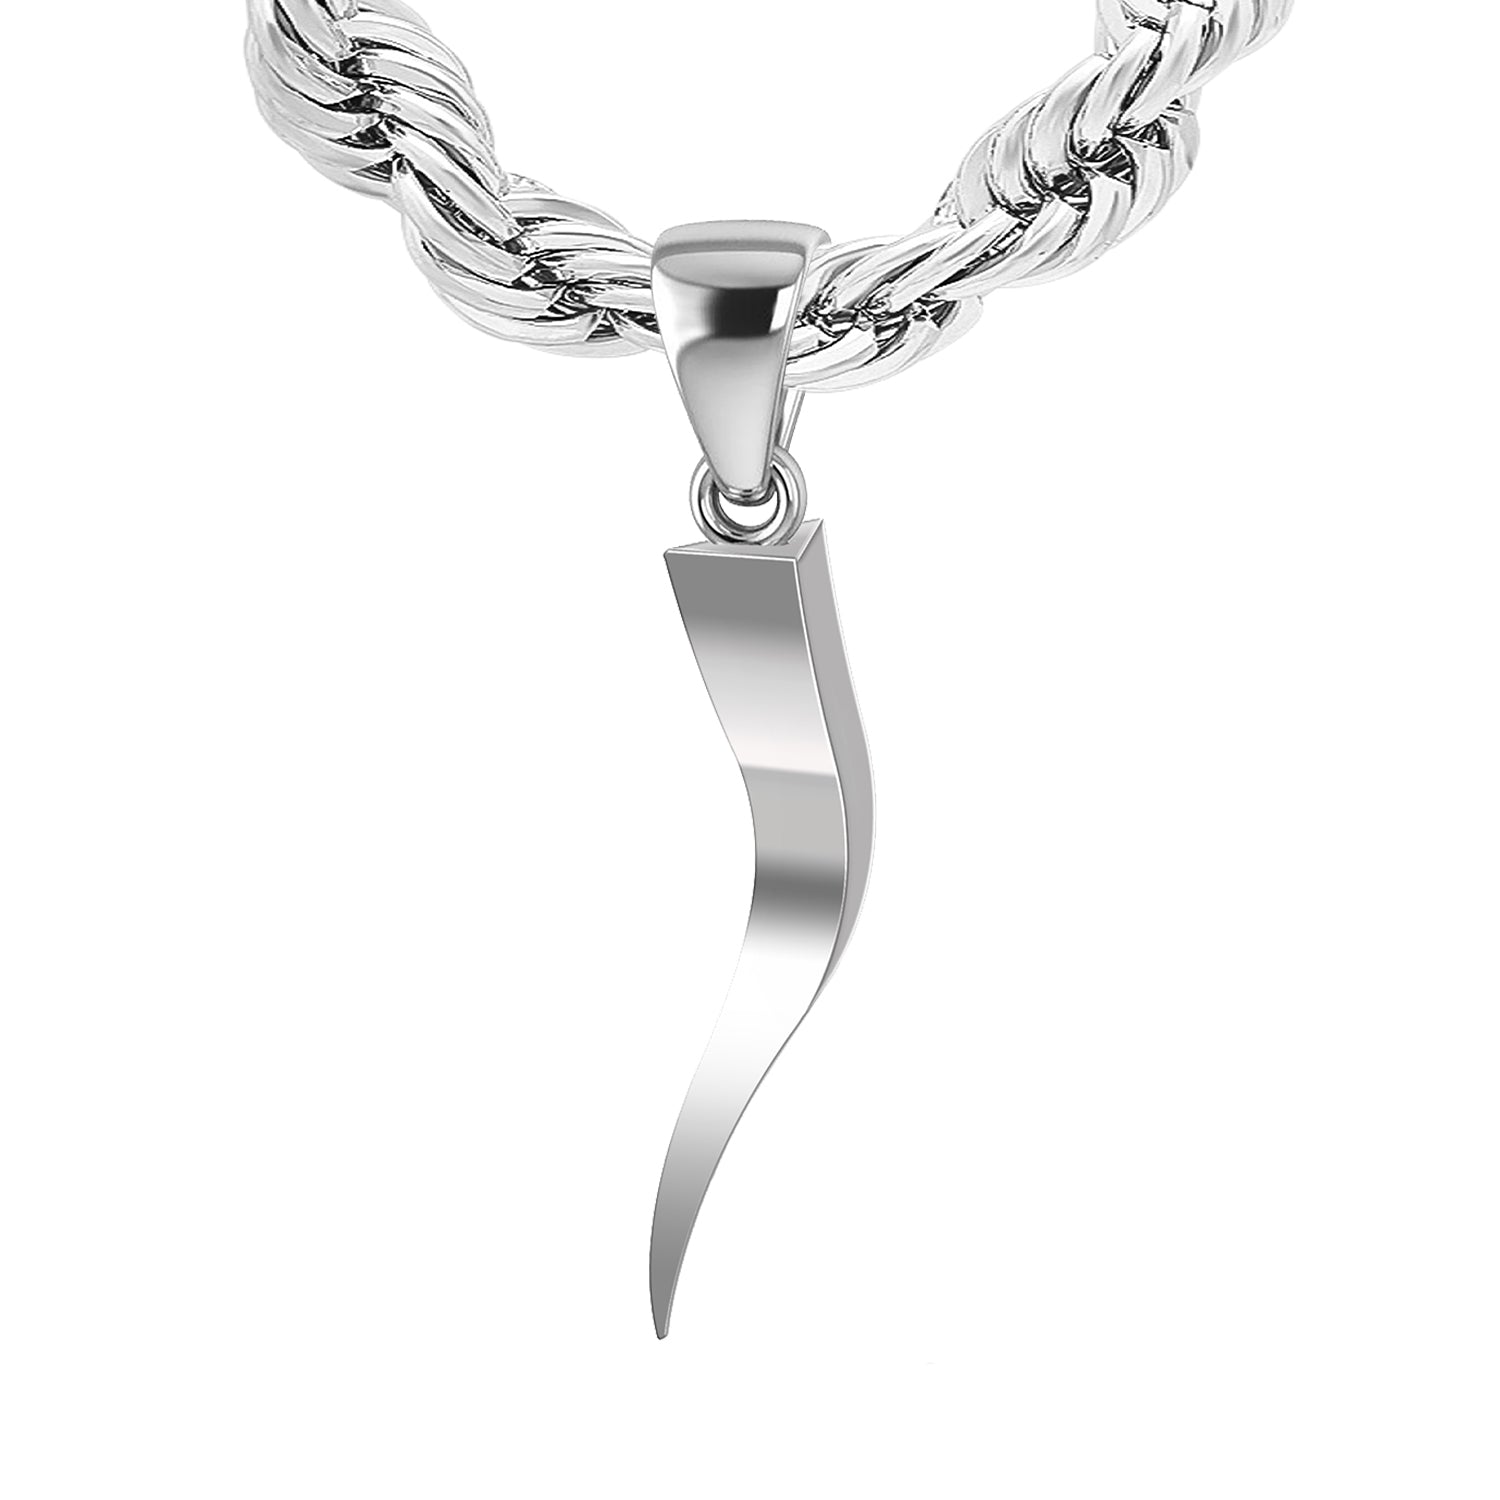 Men's Triangle 925 Sterling Silver Italian Horn Cornicello Amulet Pendant Necklace, 28mm - US Jewels